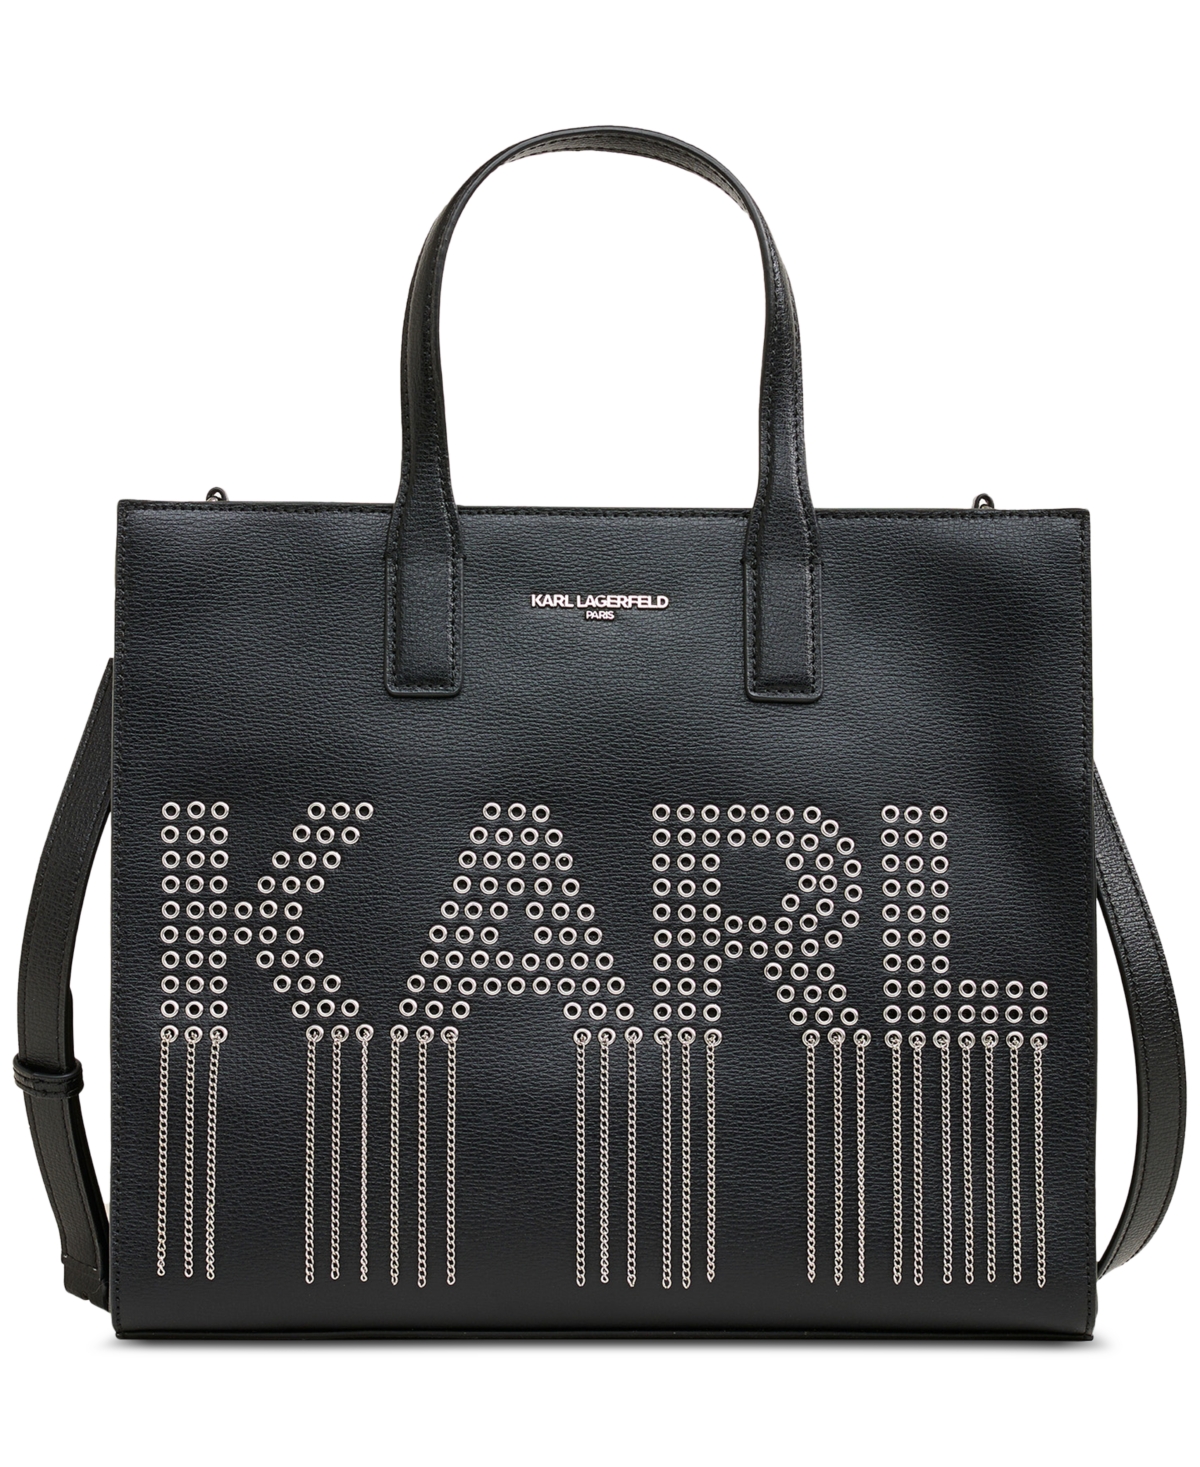 Karl Lagerfeld Nouveau Medium Leather Tote In Charcoal